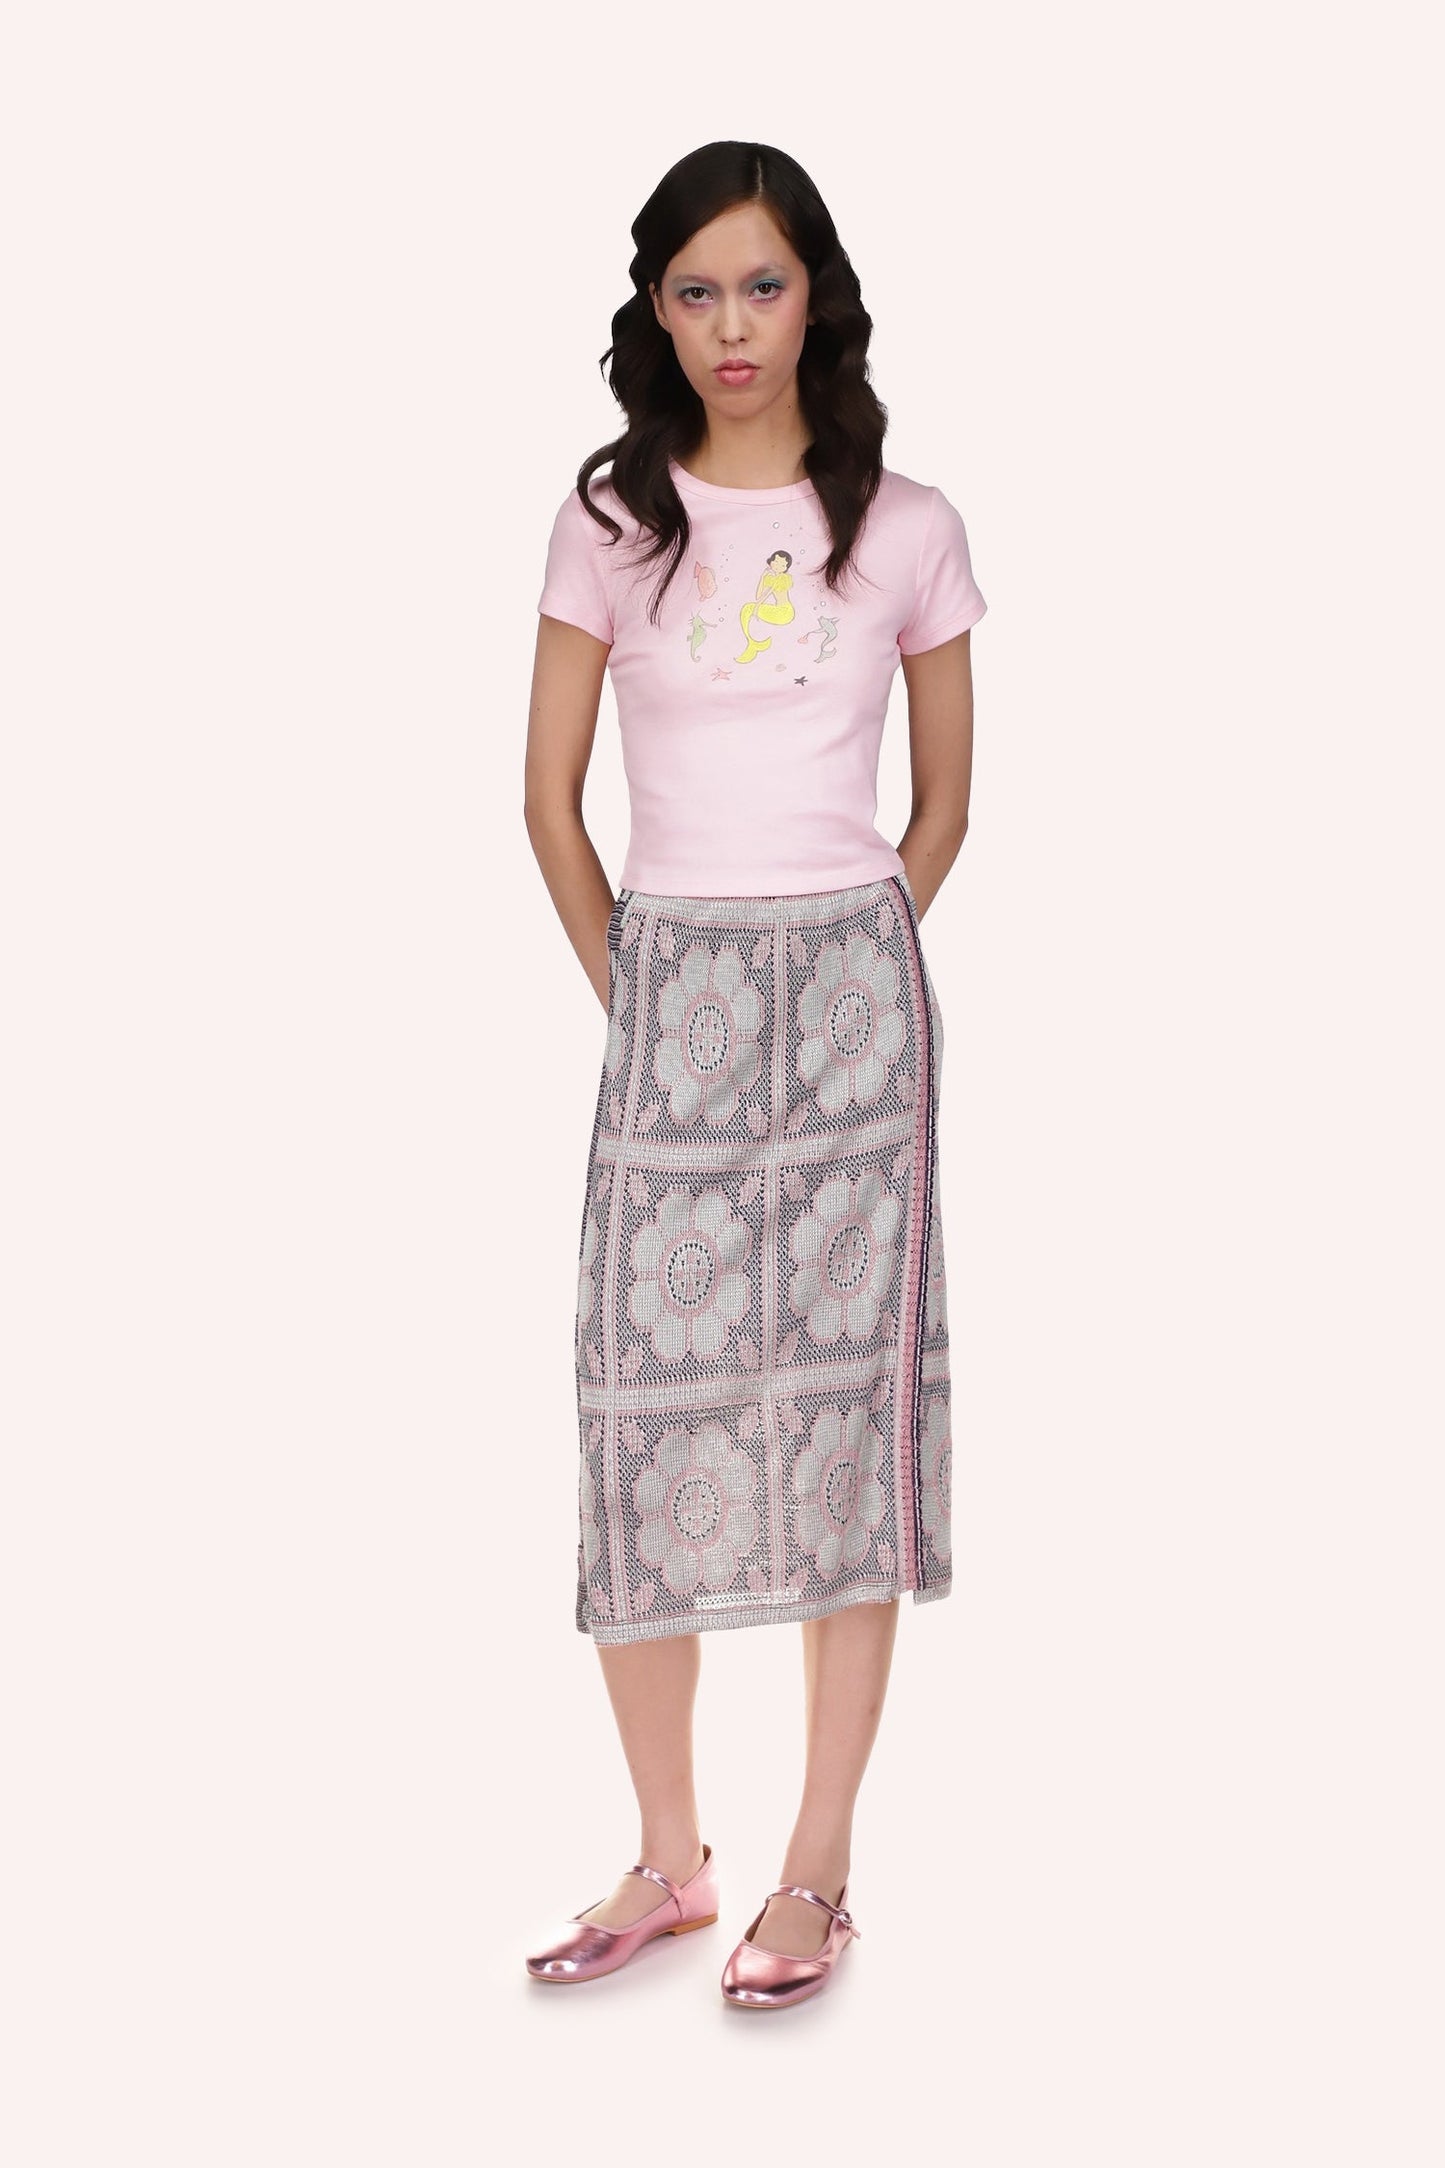 Opalescent Knit Skirt is in grayish color with large squares with circle inside pattern